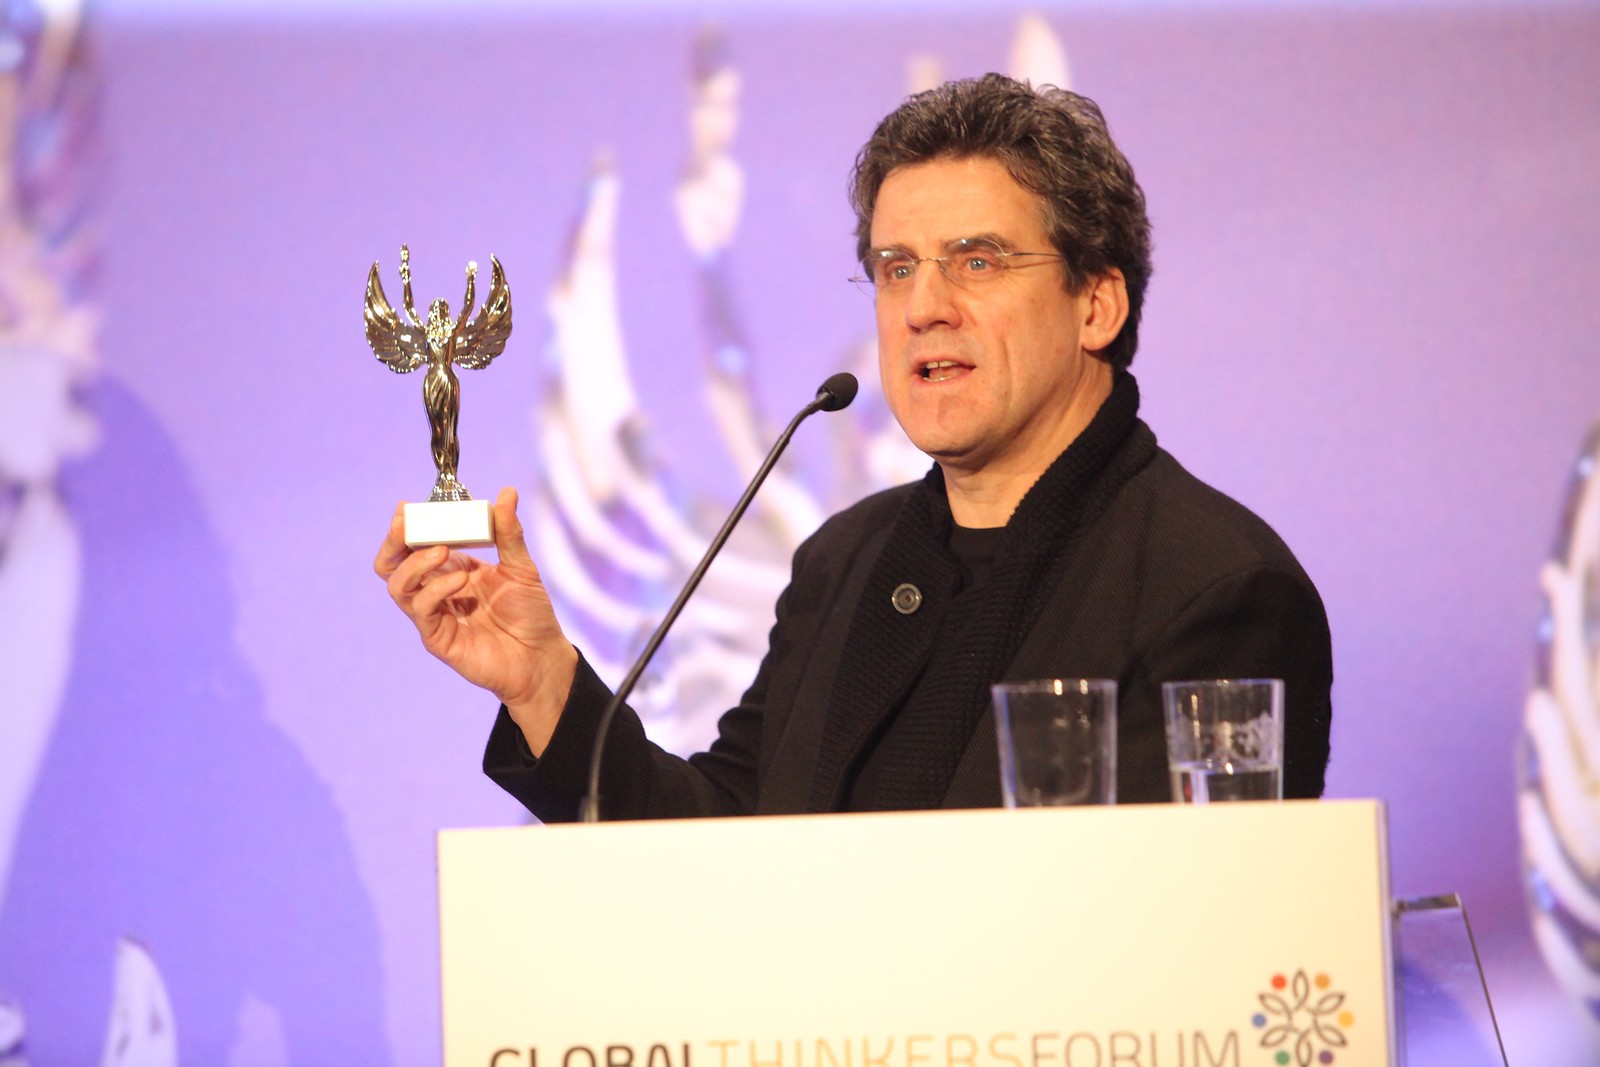 Sir Dirk Brosse receiving the GTF 2013 Award for Excellence in Cultural Creativity